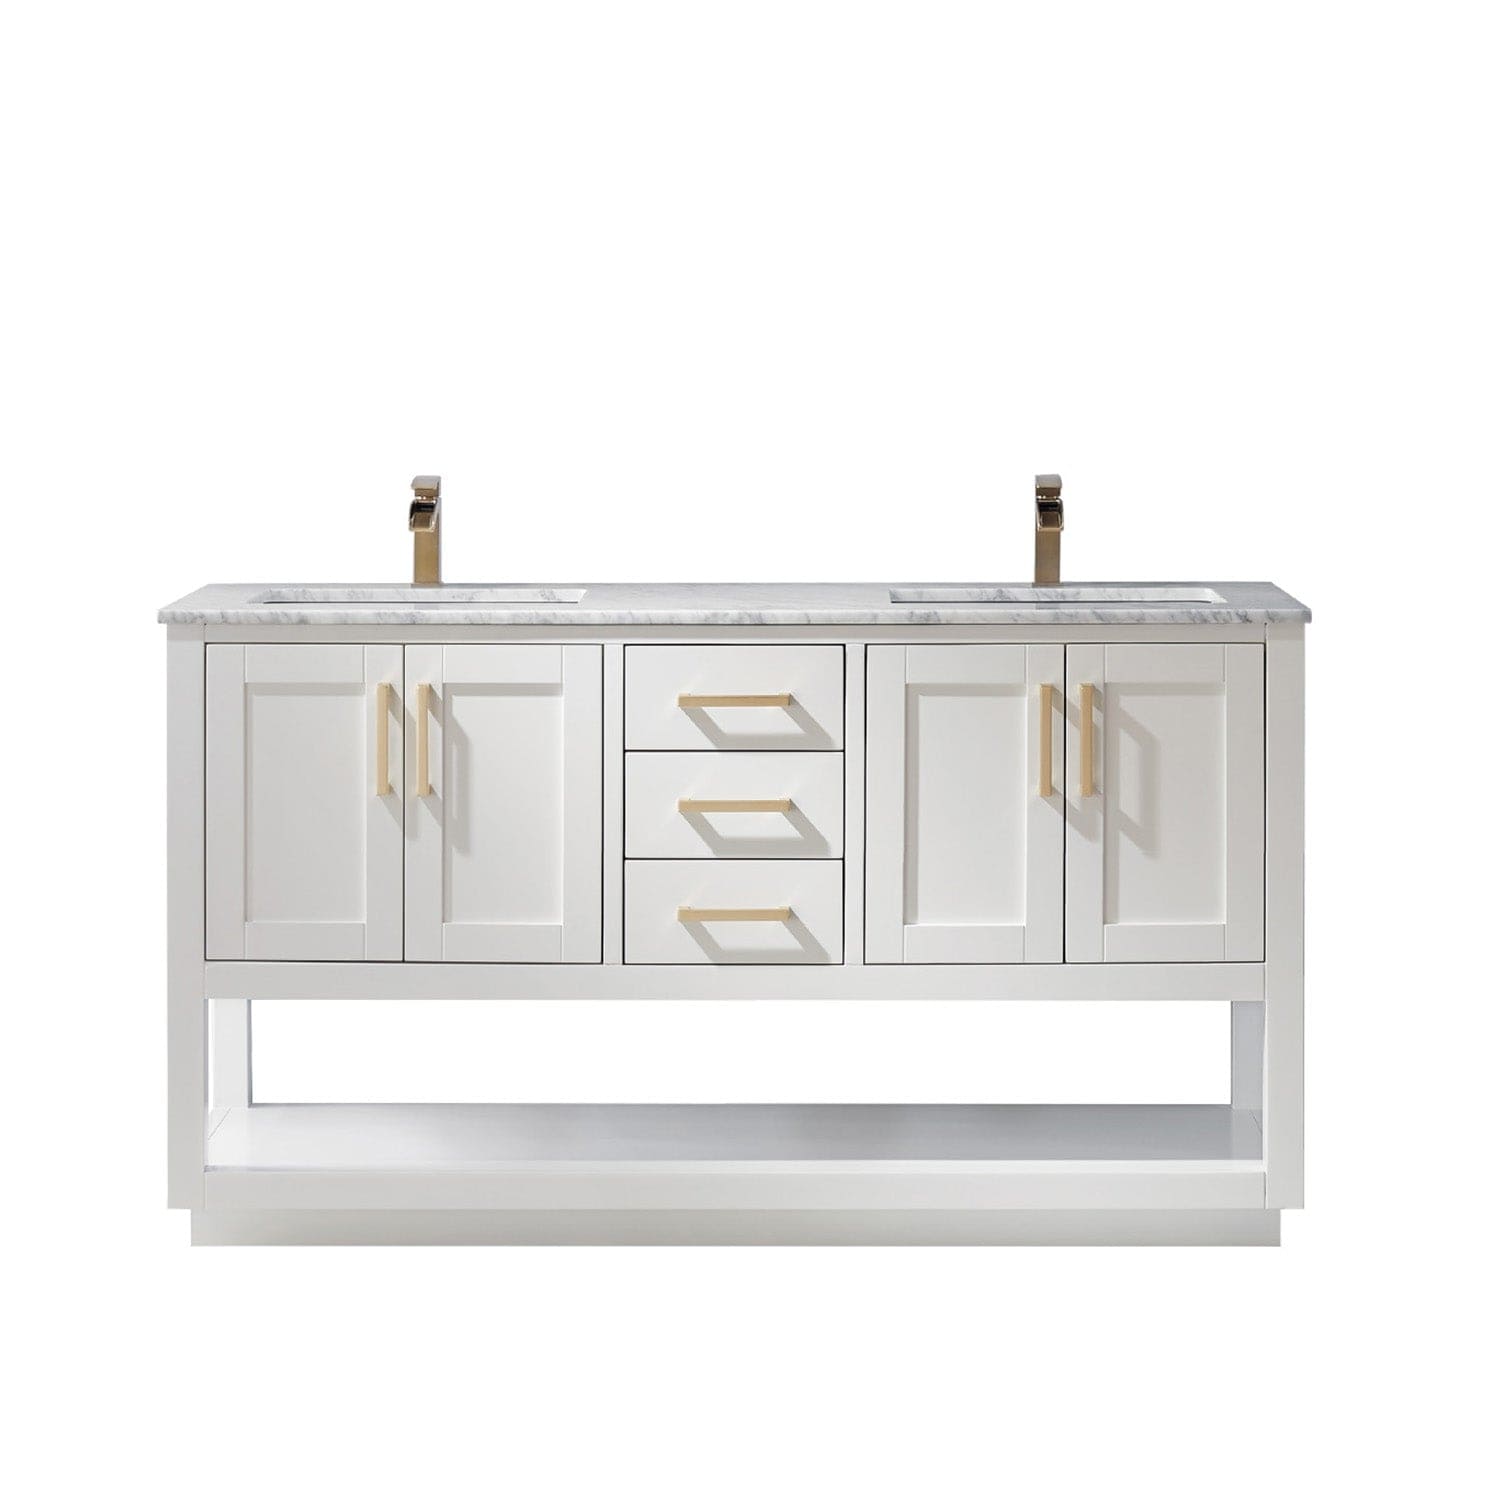 Altair Remi 60" Double Bathroom Vanity Set in White and Carrara White Marble Countertop without Mirror 532060-WH-CA-NM - Molaix631112971560Vanity532060-WH-CA-NM